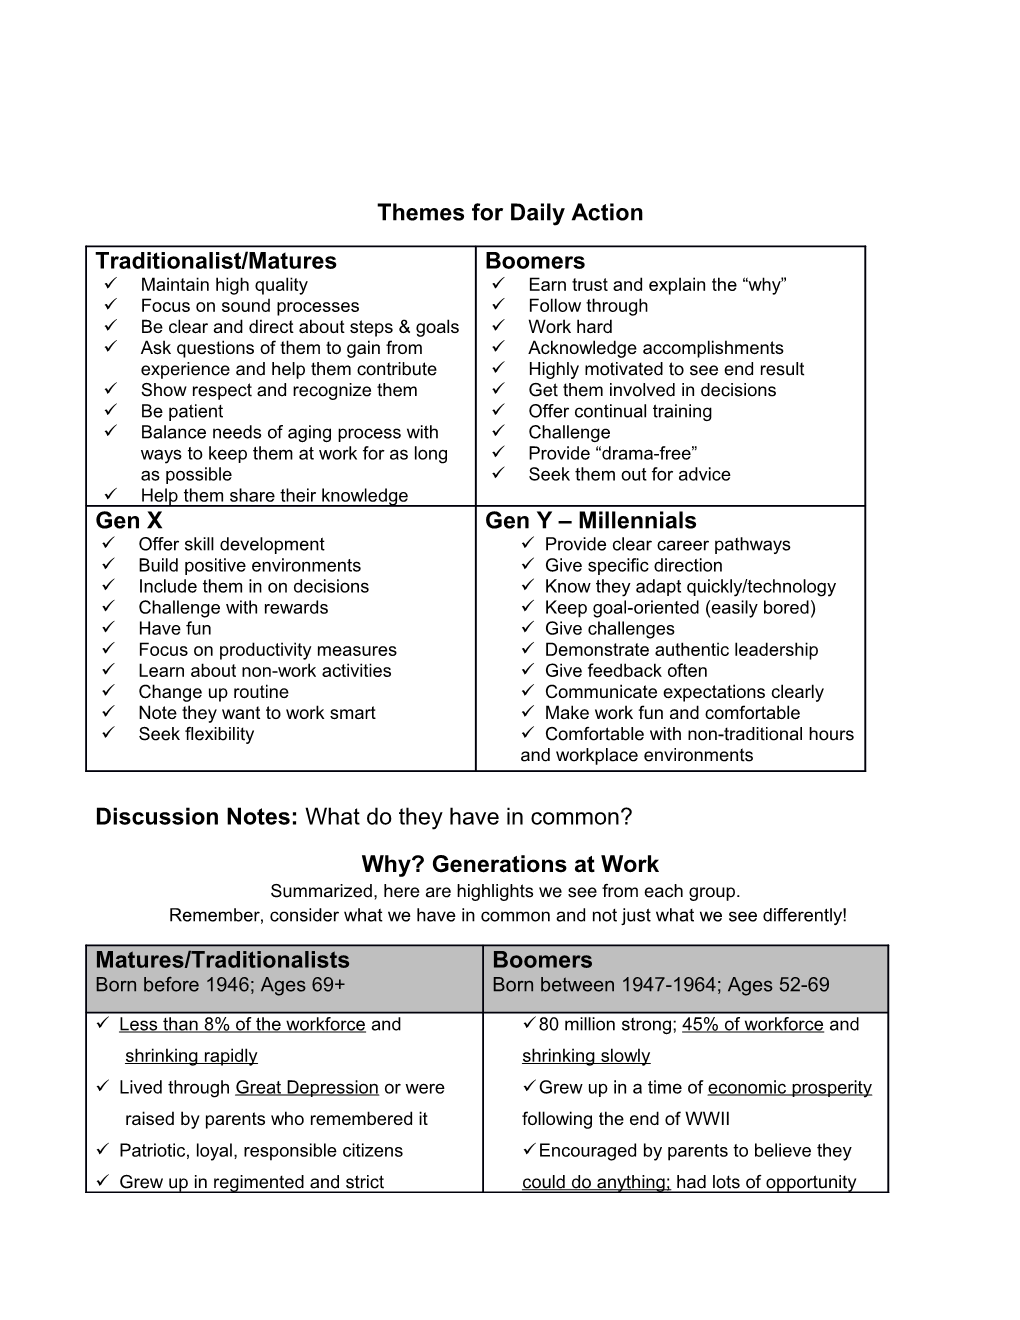 Themes for Daily Action